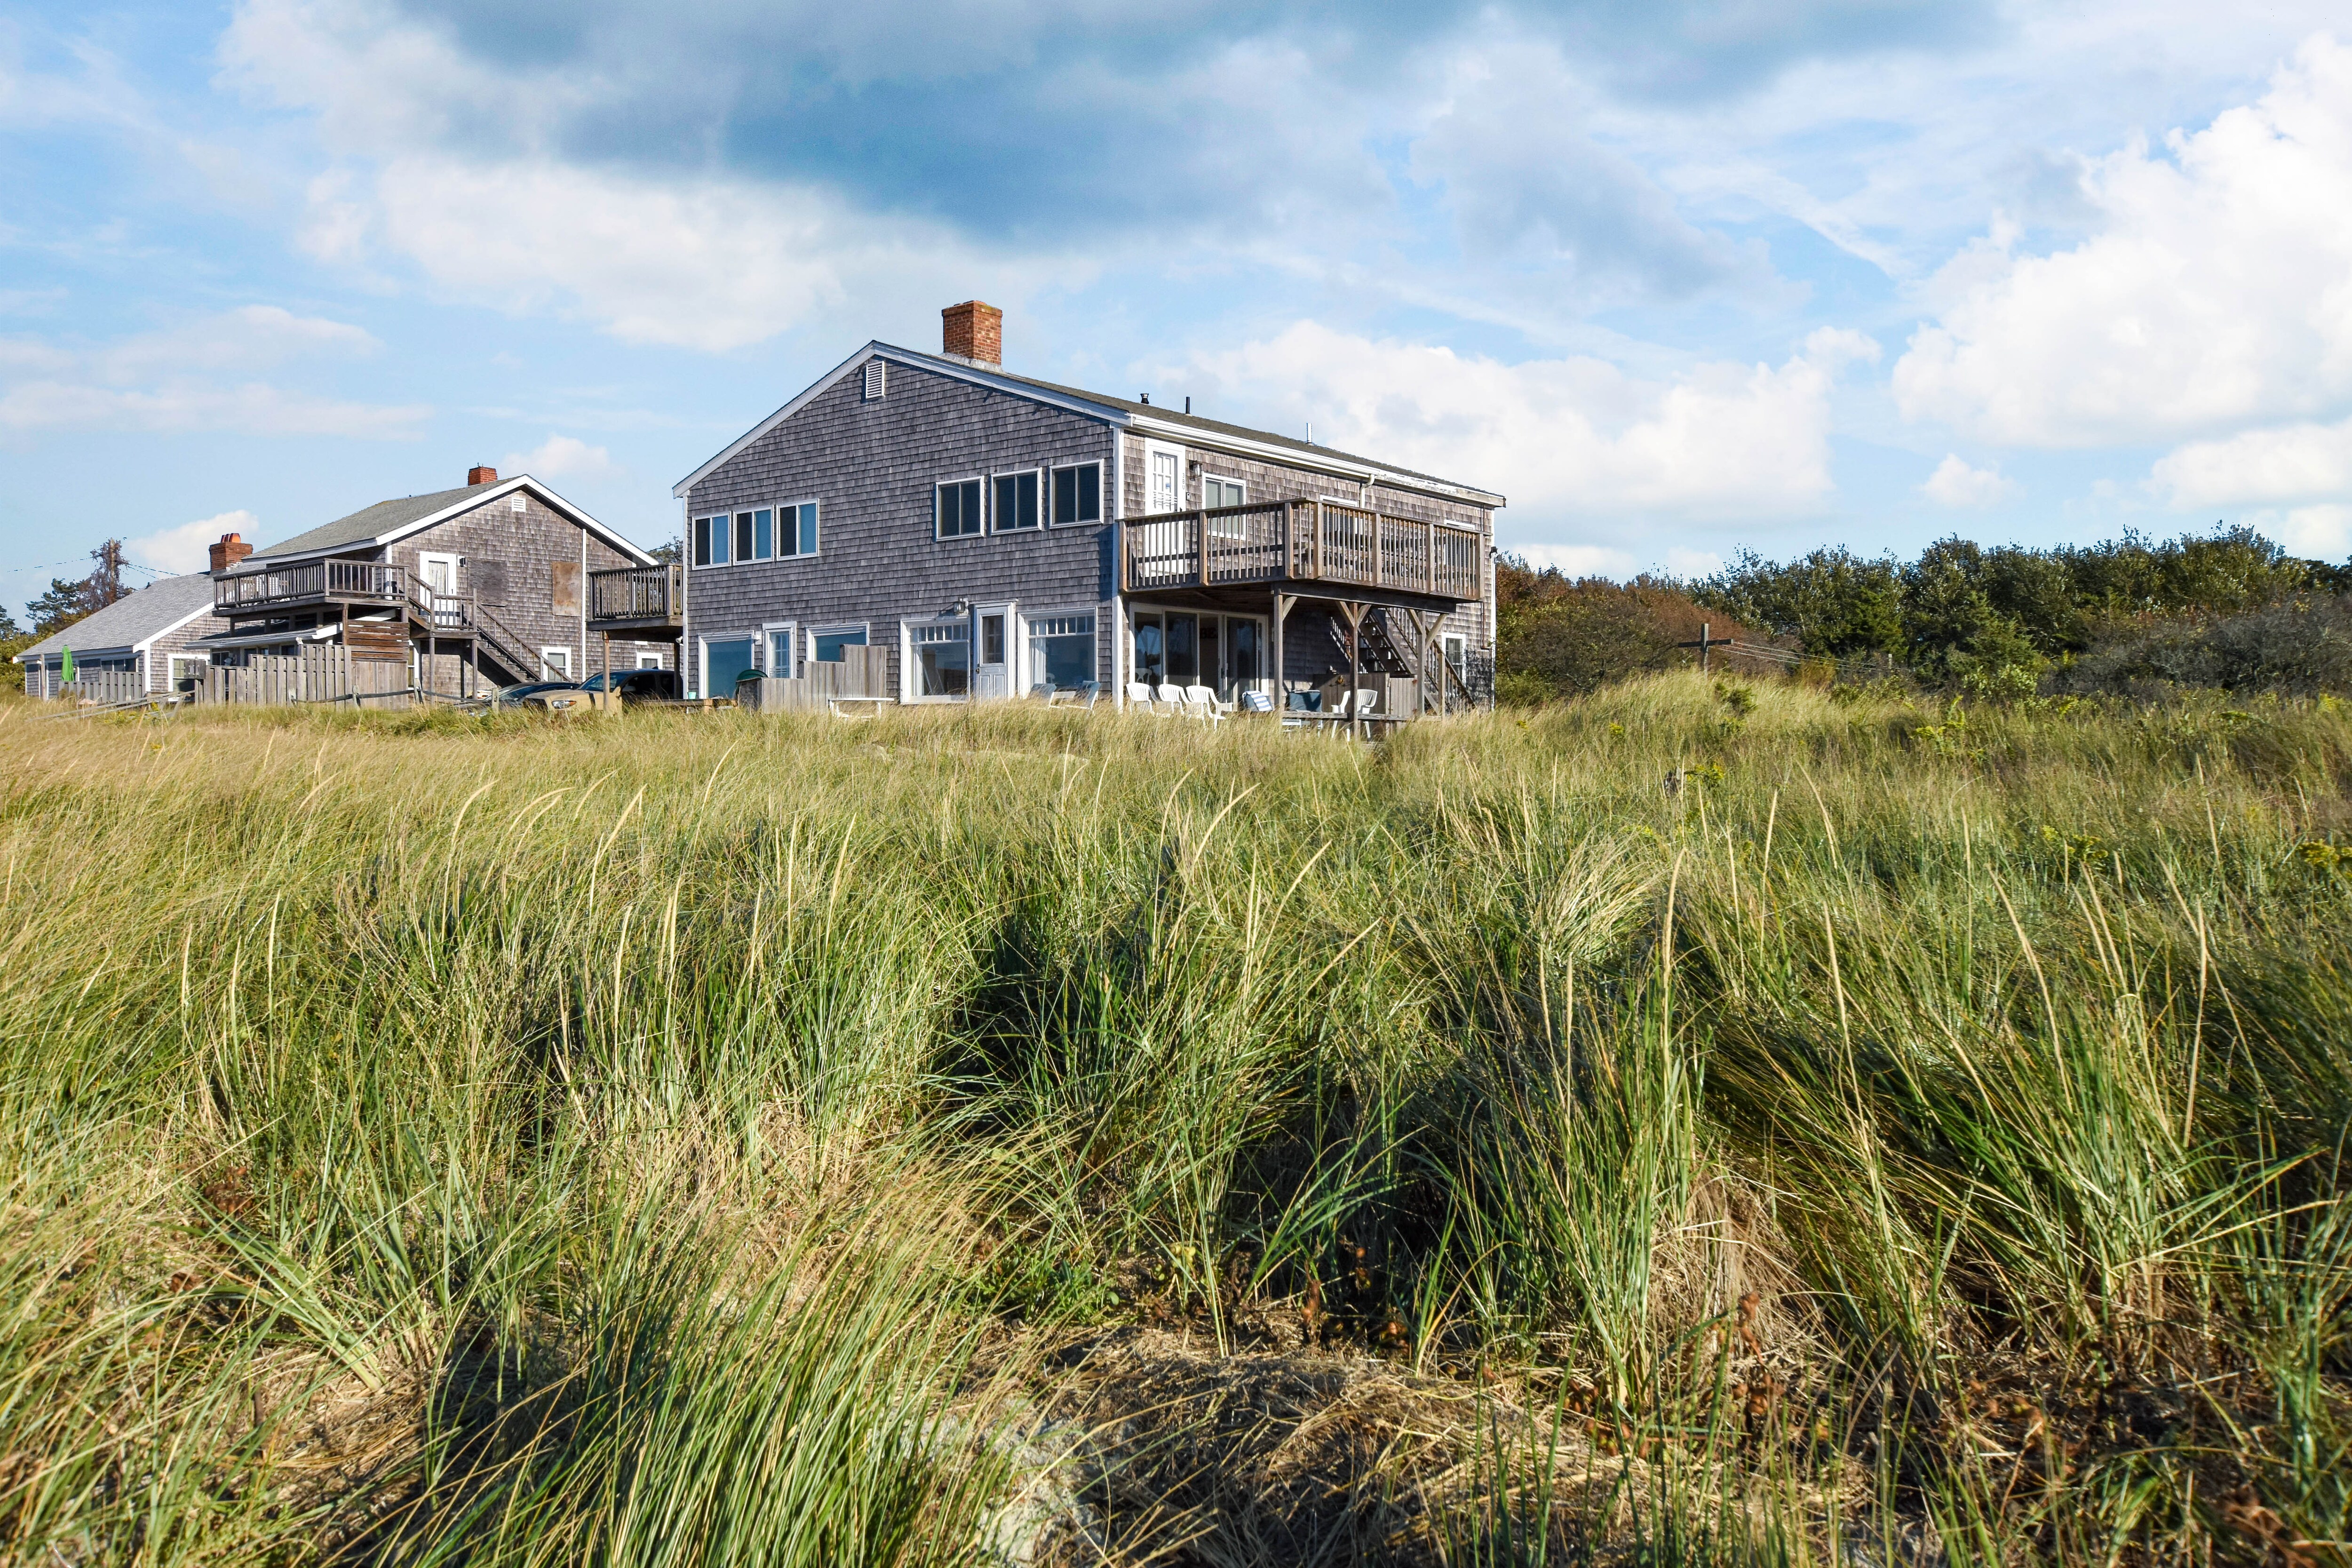 Property Image 2 - 15554: Beachfront on Skaket w/ Unbelievable Water Views of Cape Cod Bay from Large Deck!